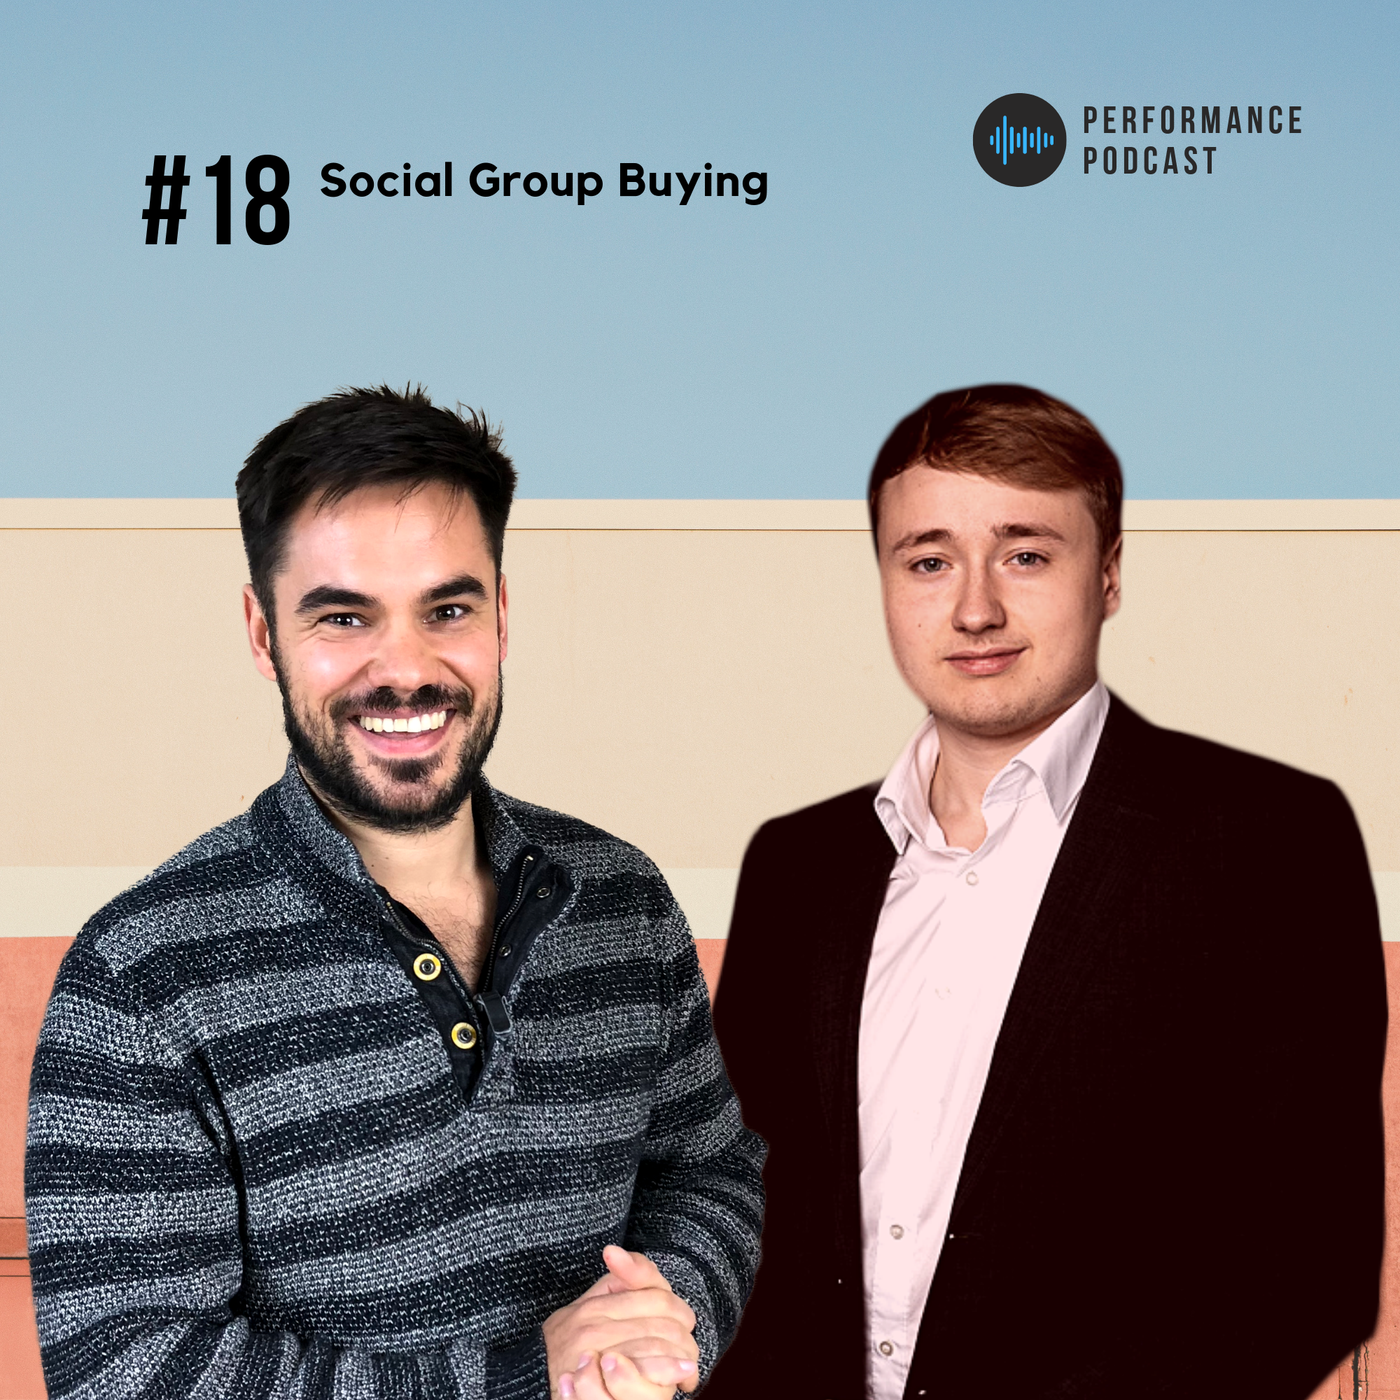 Social Group Buying | #18 Performance Podcast